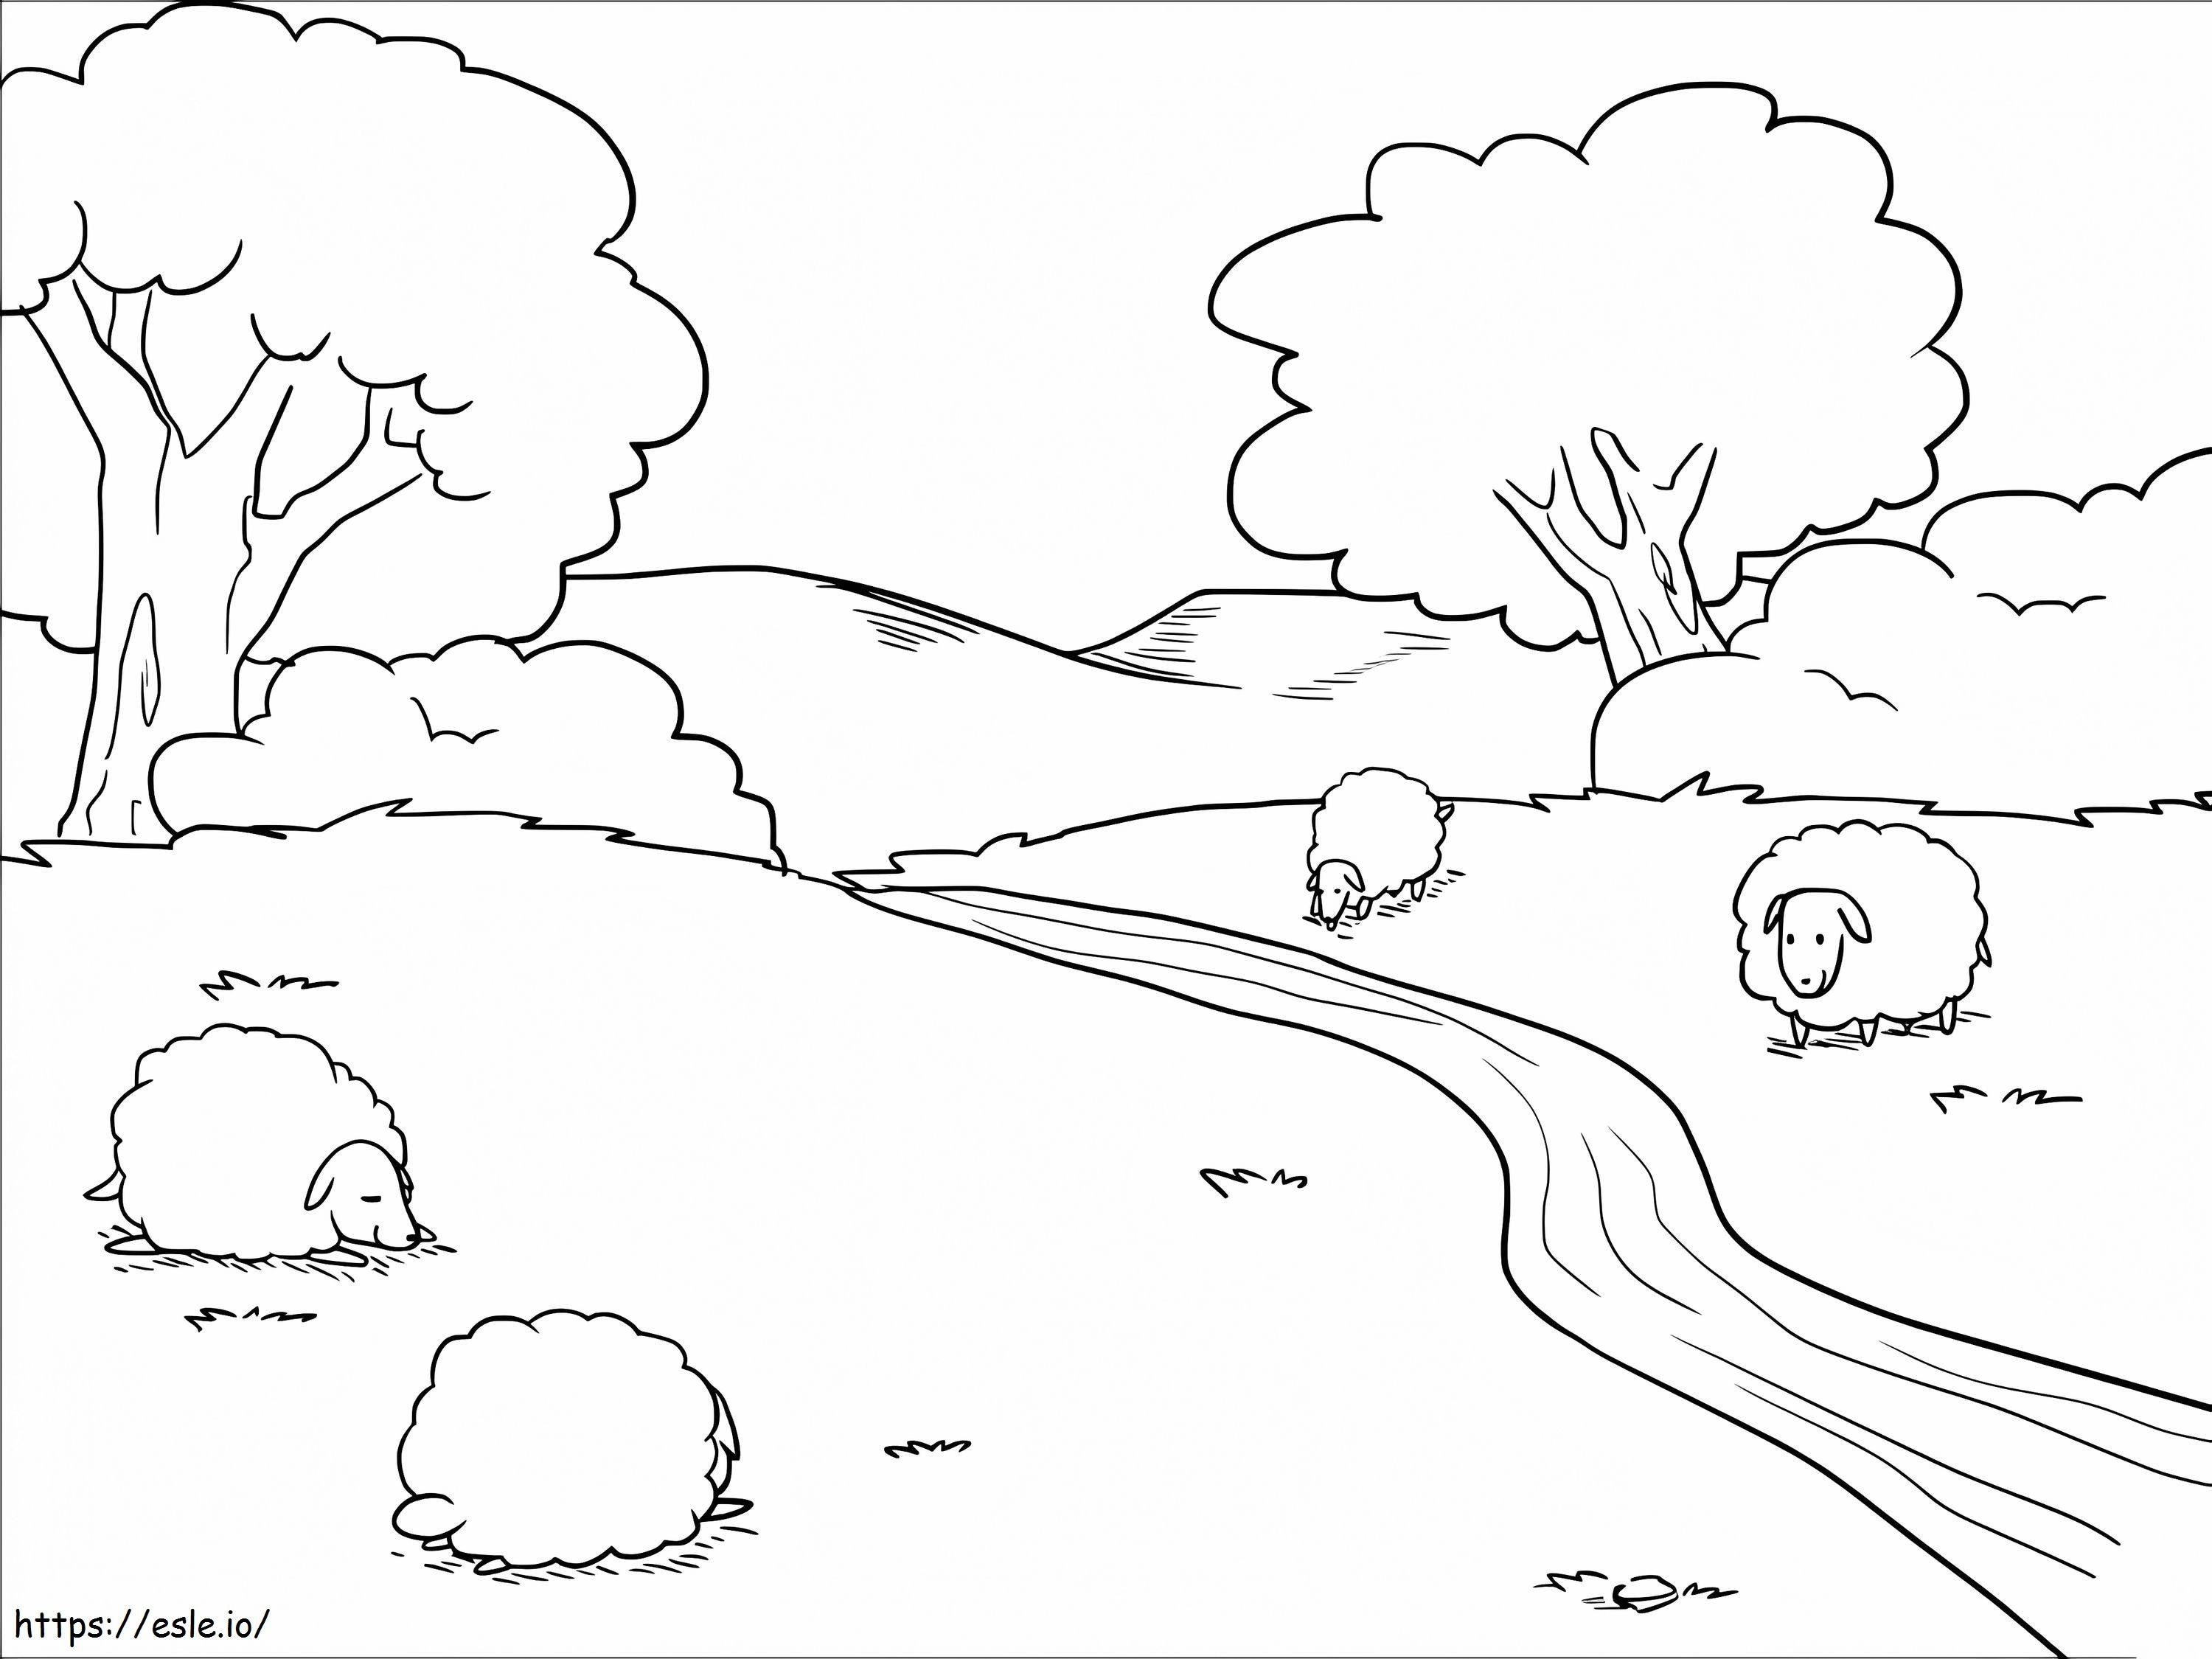 River And Sheep coloring page